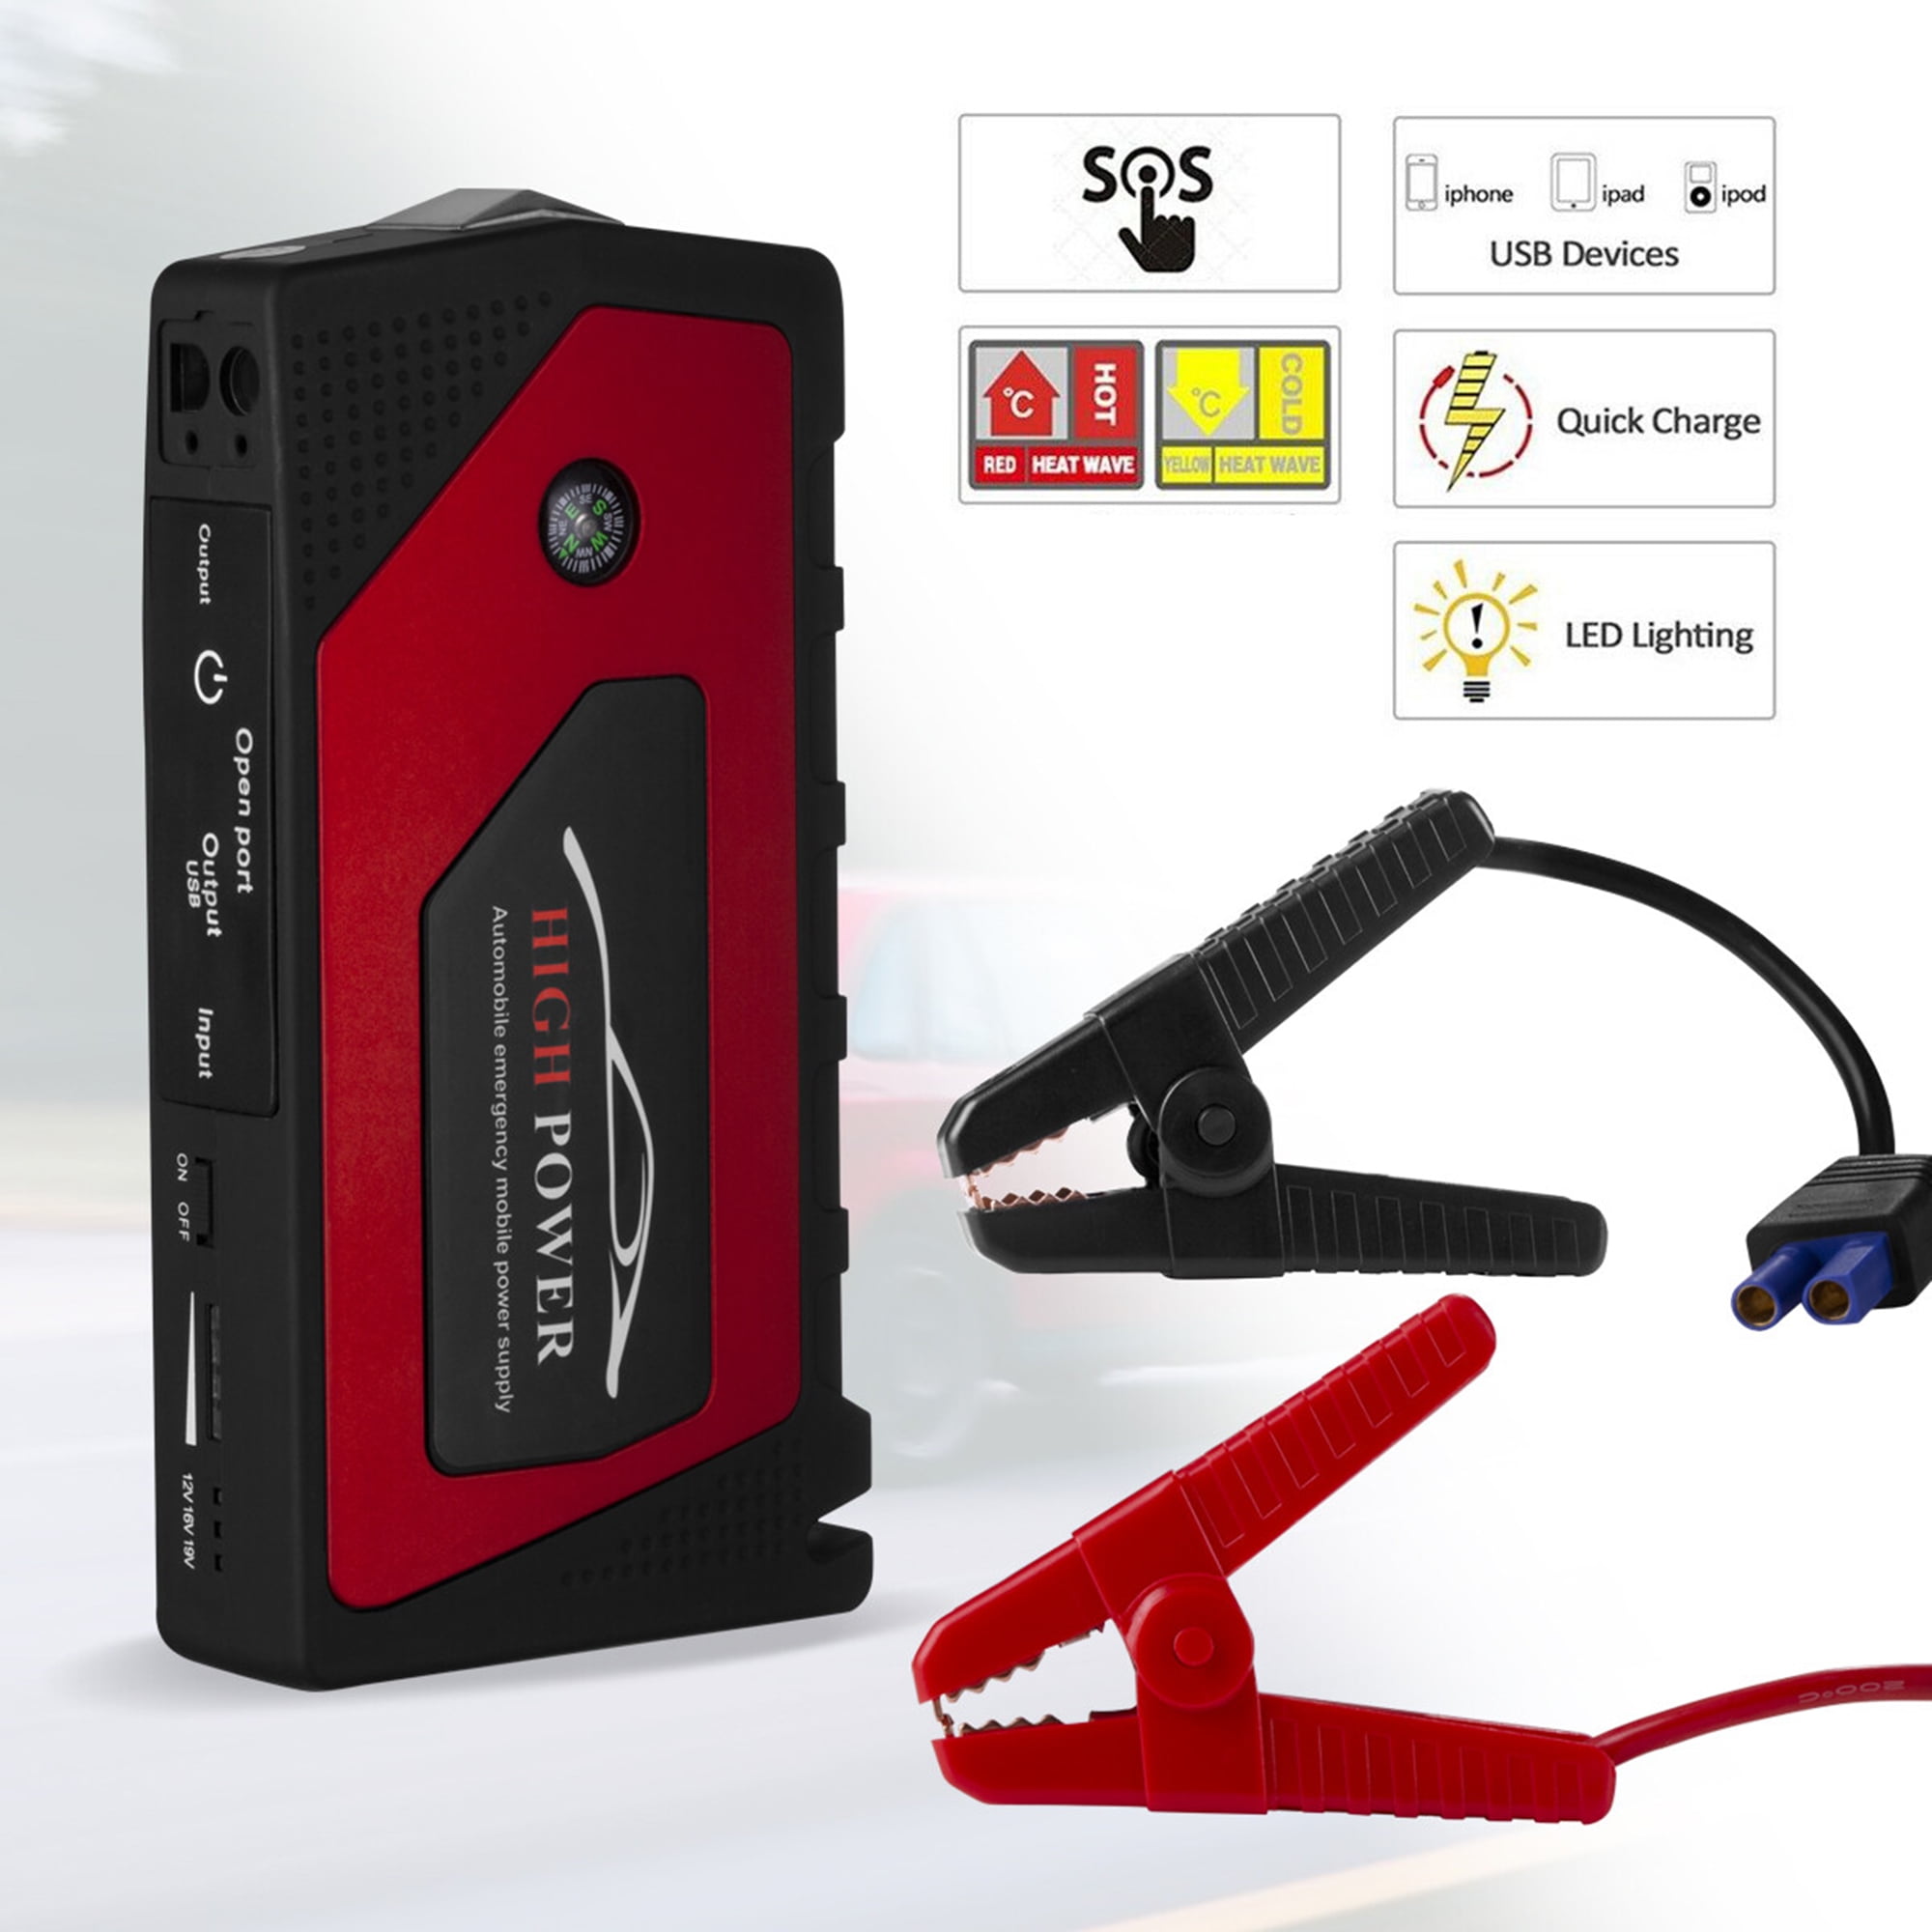 200A LCD Auto Car Battery Charger Power Bank Jump Starter Portable Power Bank US 